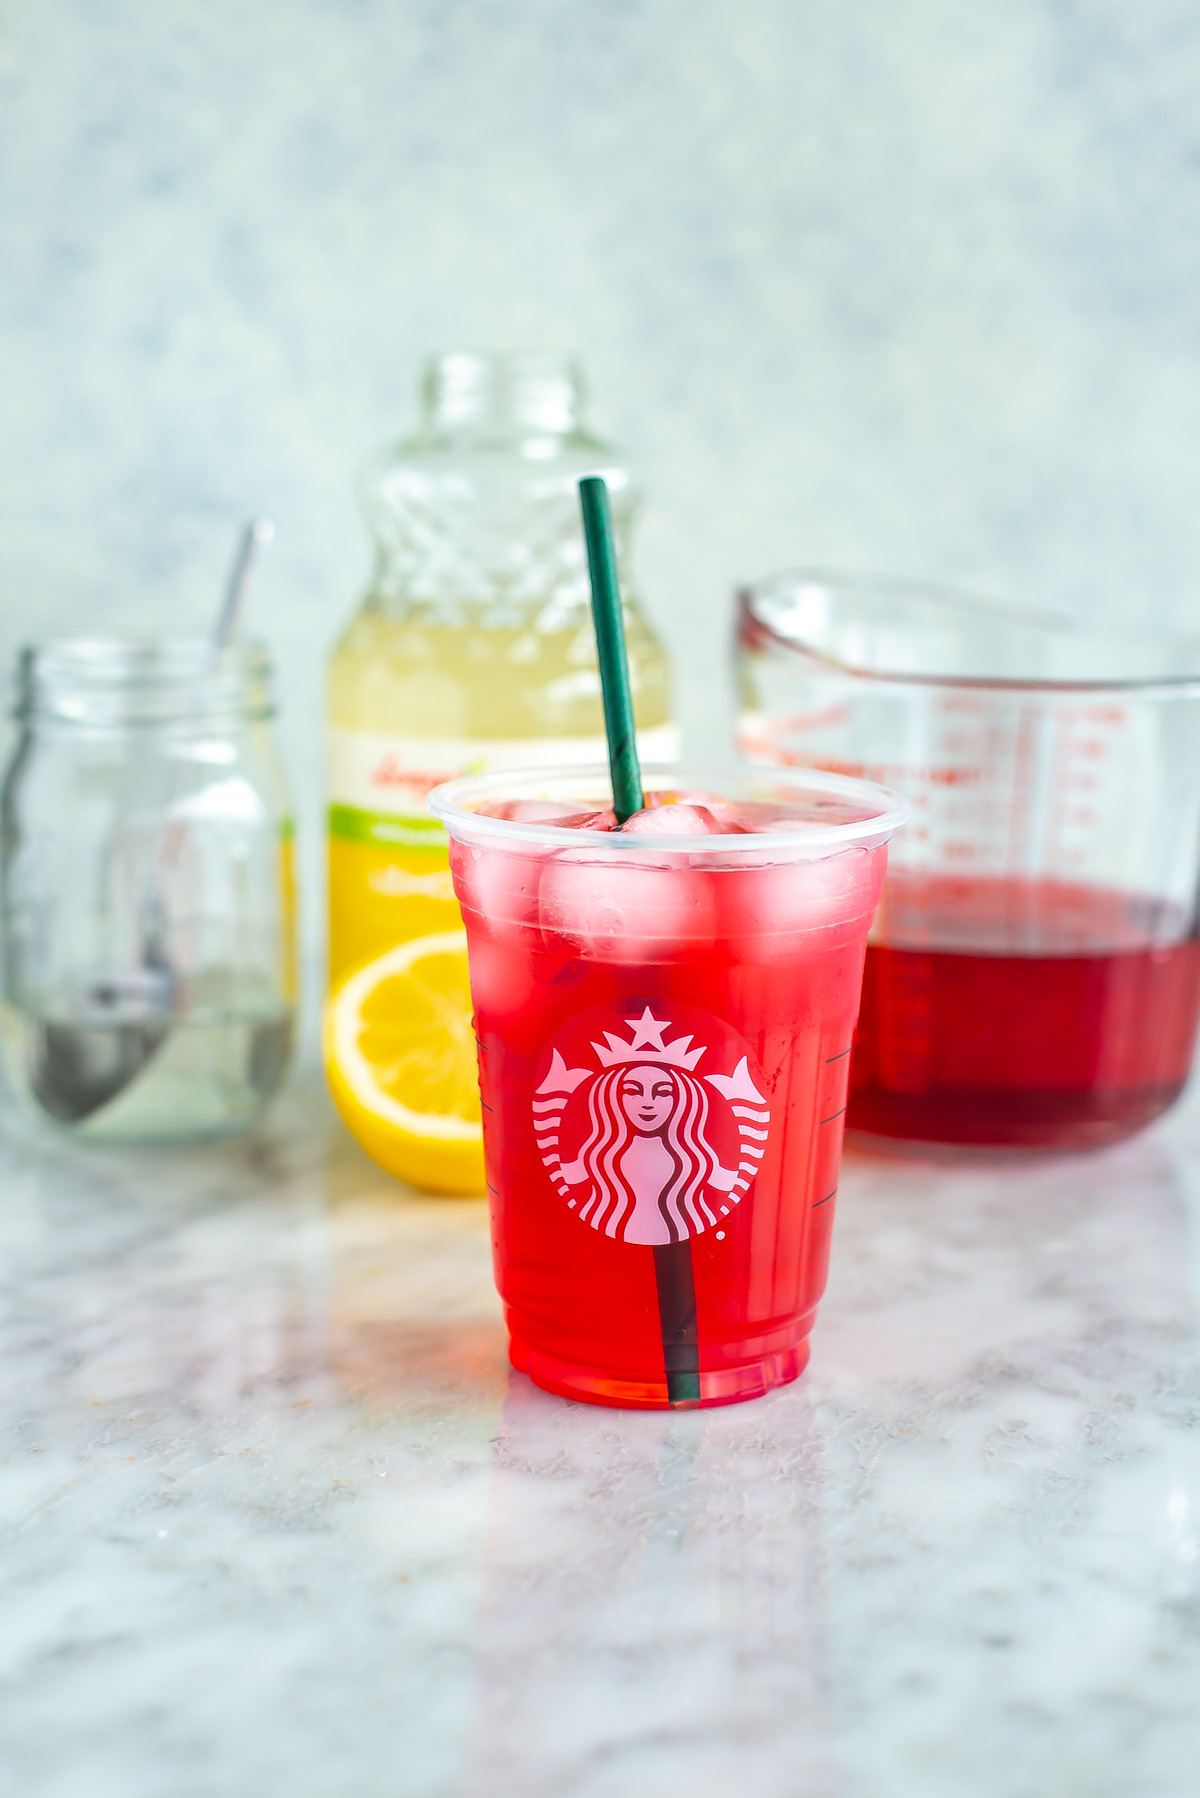 A glass of homemade Starbucks passion tea lemonade with the ingredients placed behind it.